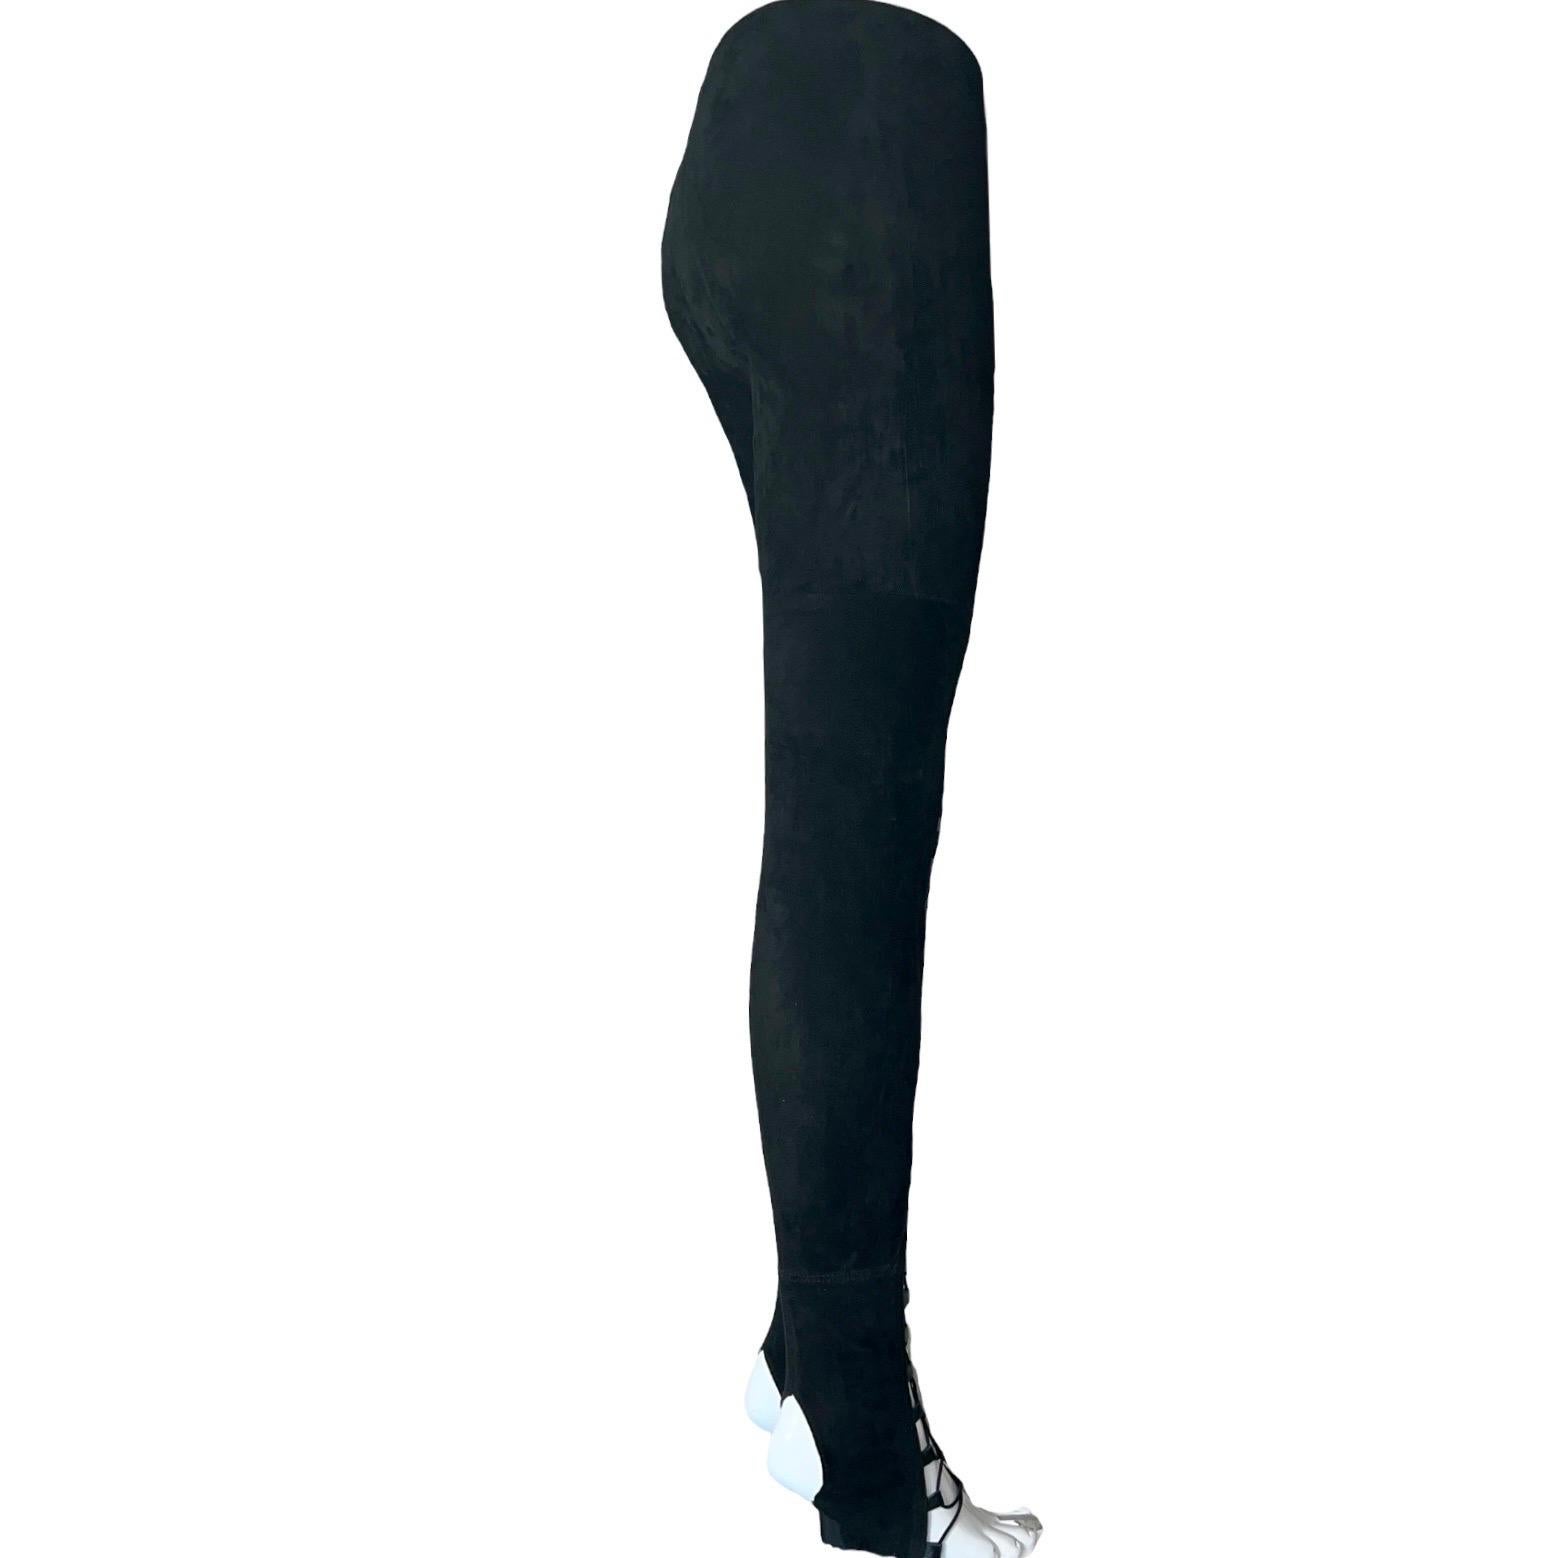 These unique Jitrois suede pants features a smooth finish of flexible stretch lambskin
They fit like a glove on your body
Classic skinny leggings cut with zip in the back
So versatile - can be worn as a pants or even with a skirt or dress 
Lace up